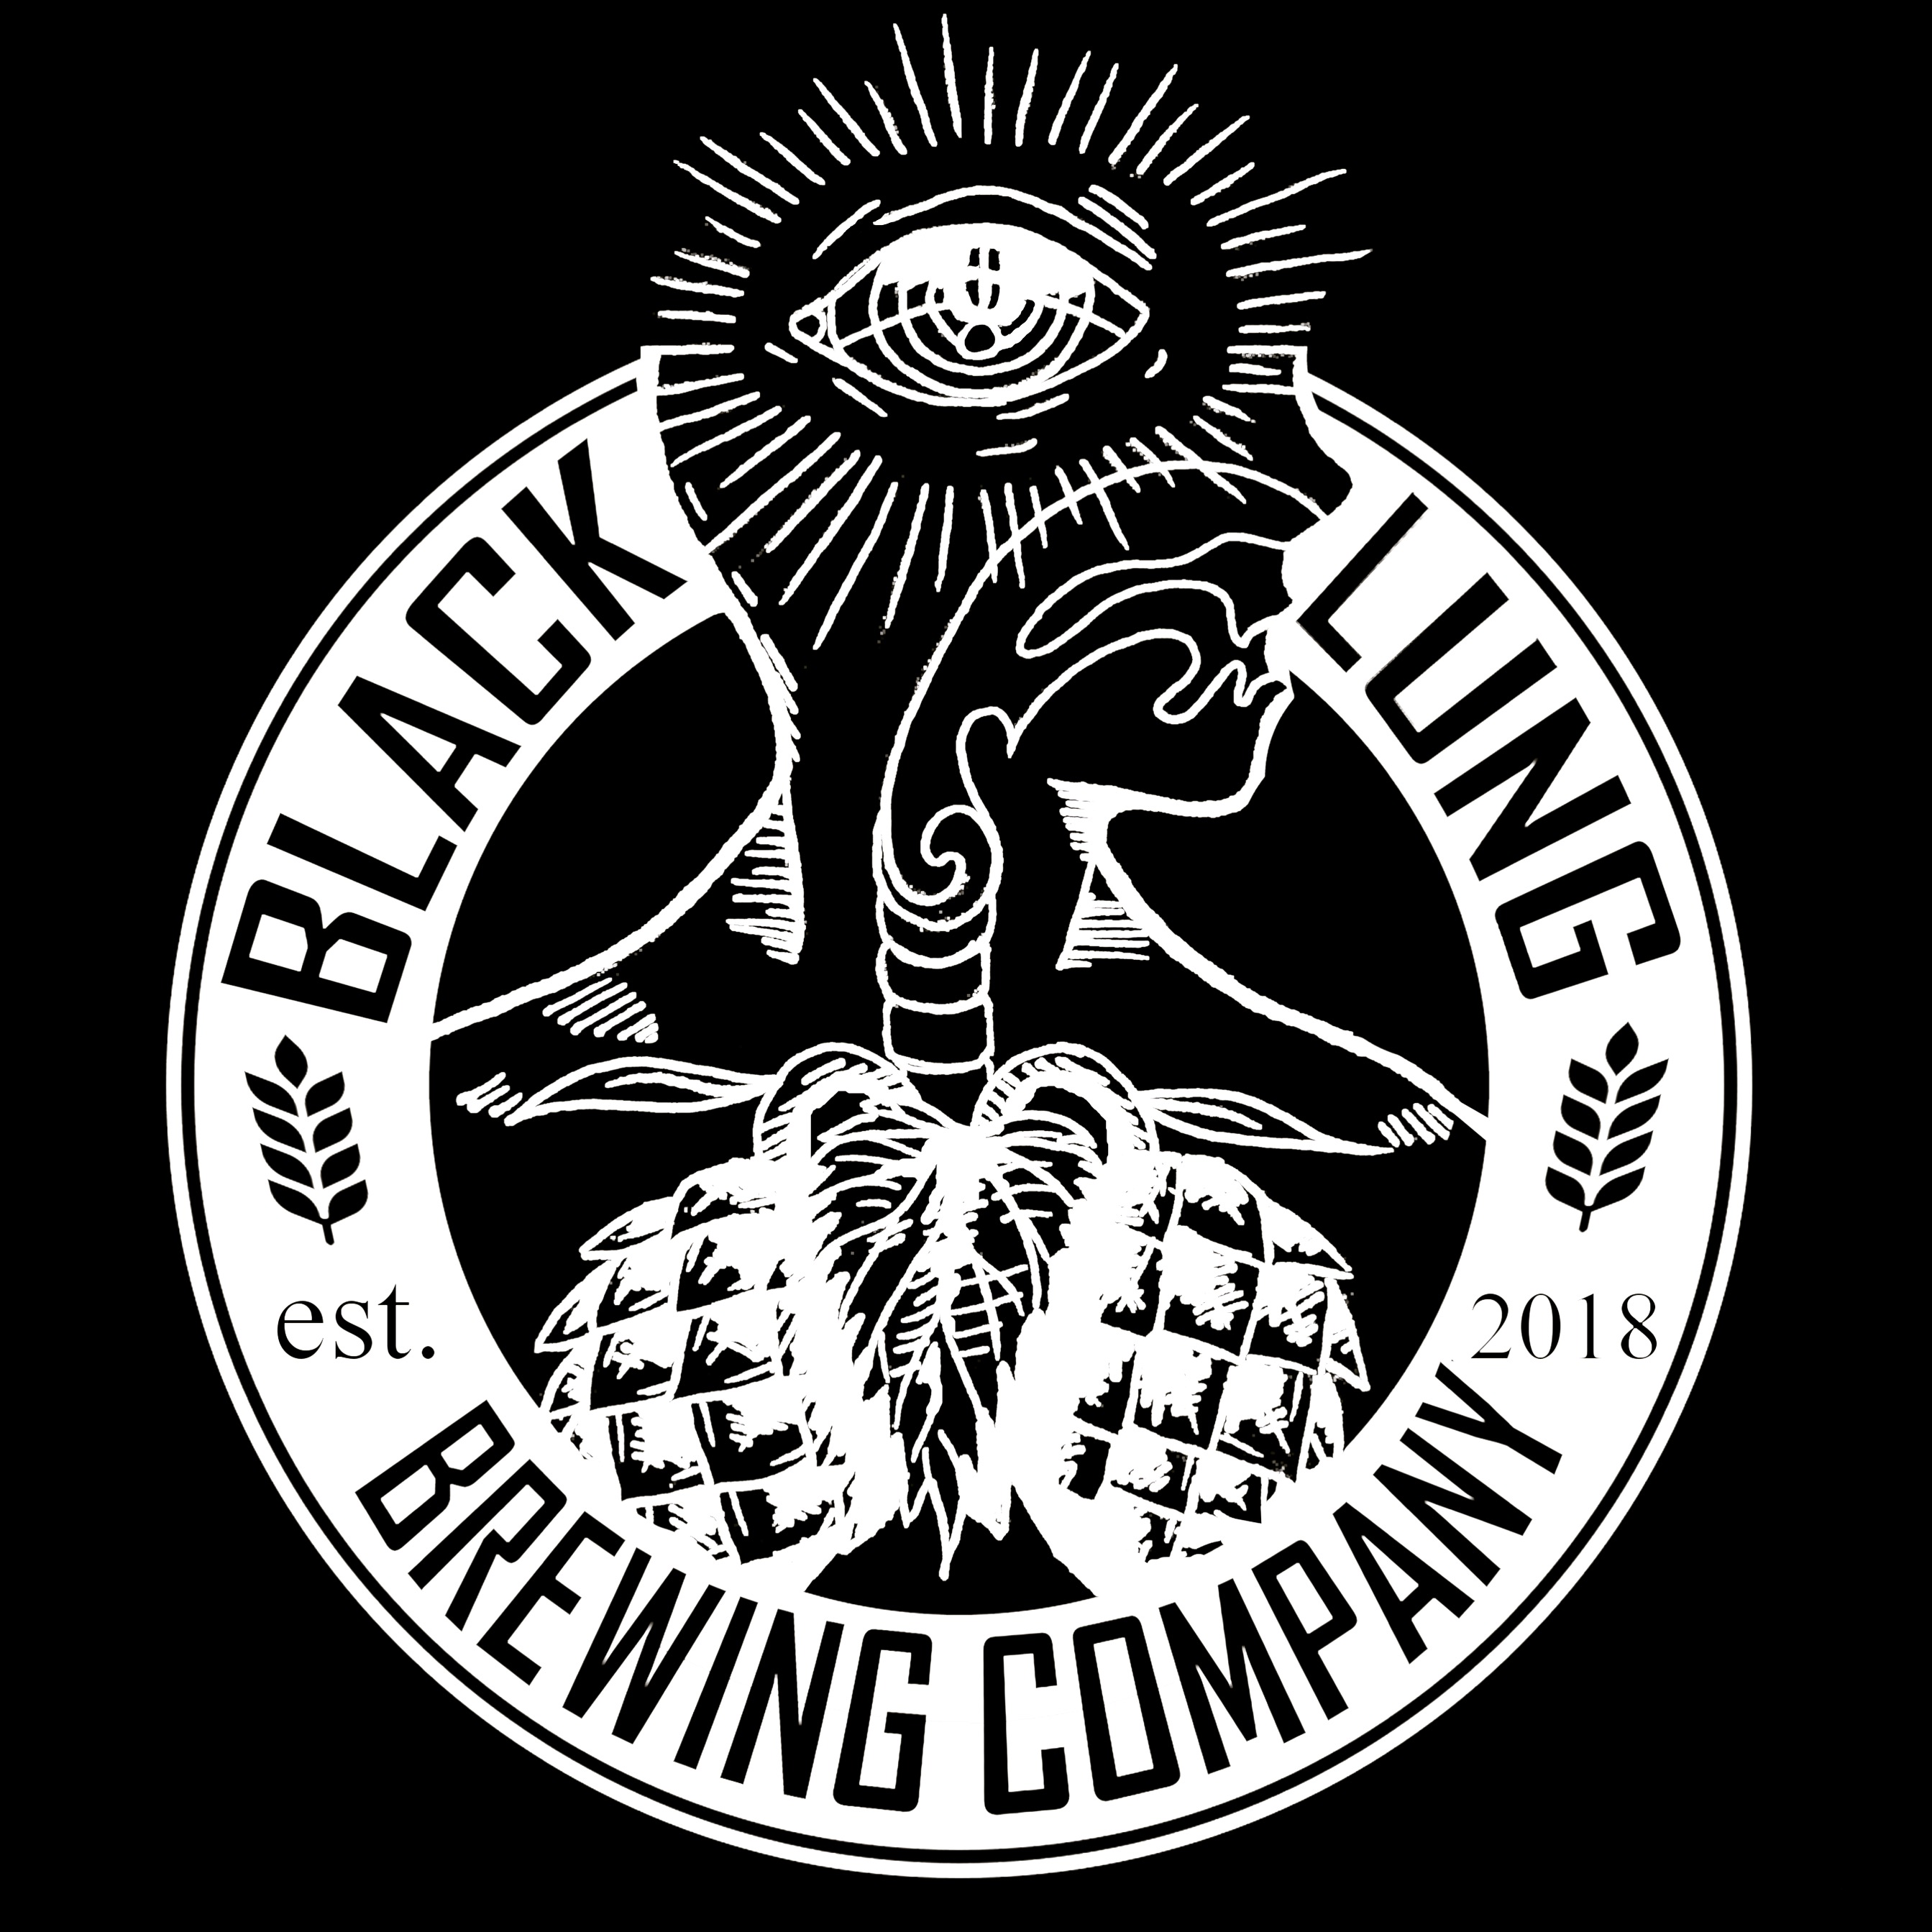 Black Lung Brewing Company